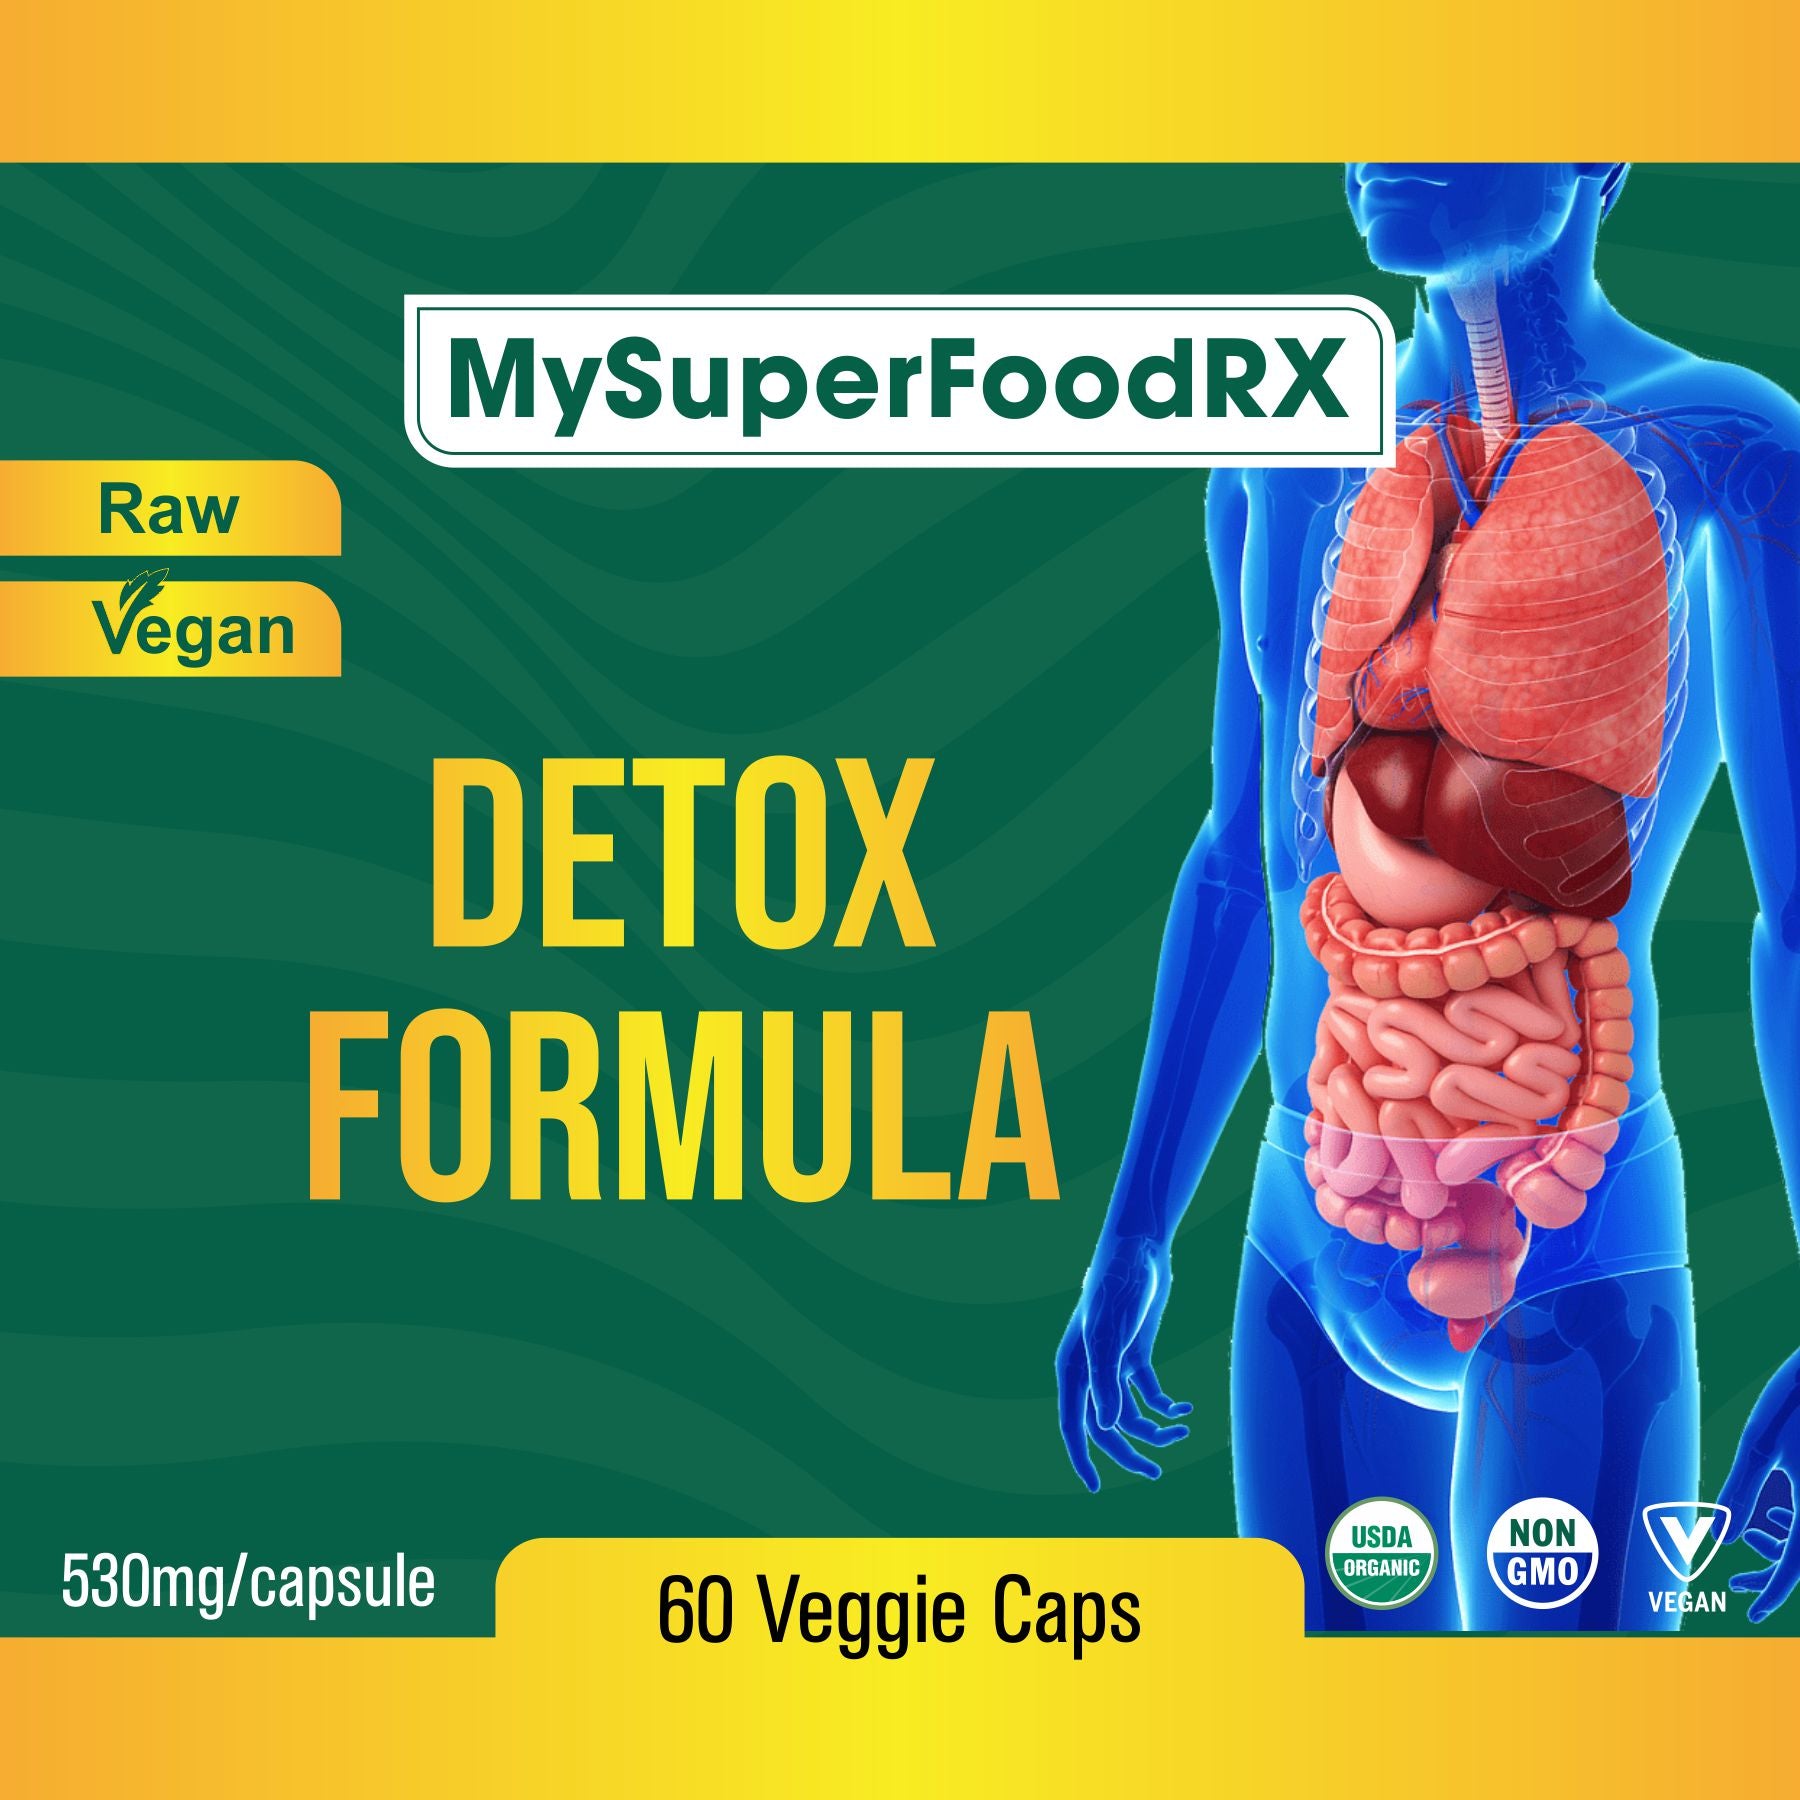 the label for my superfoodrx detox formula